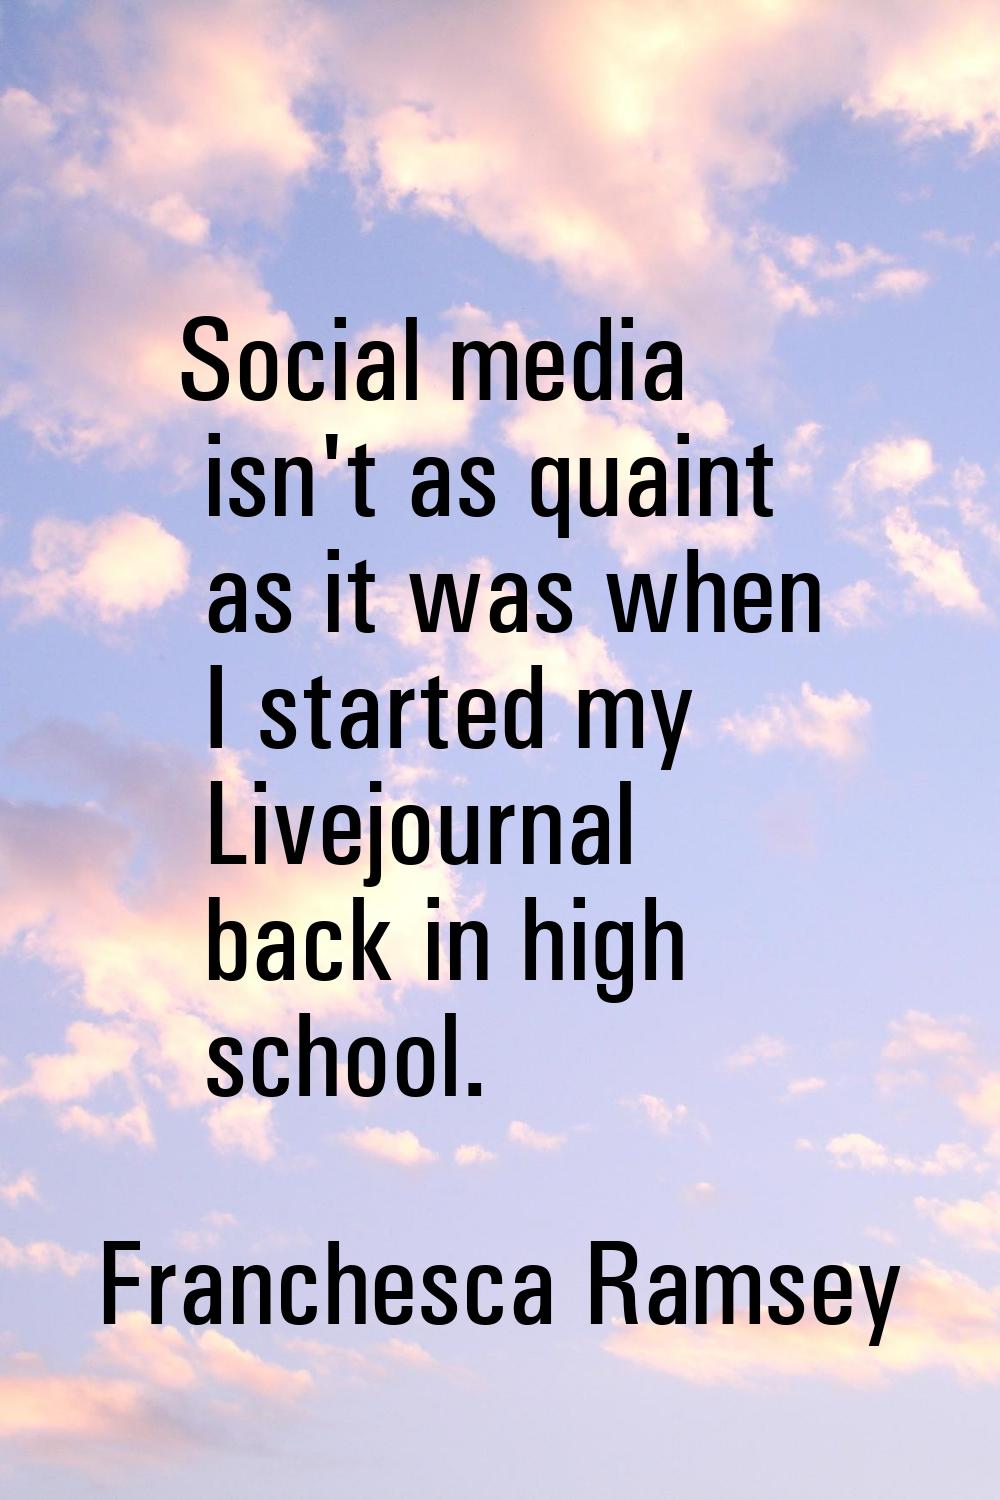 Social media isn't as quaint as it was when I started my Livejournal back in high school.